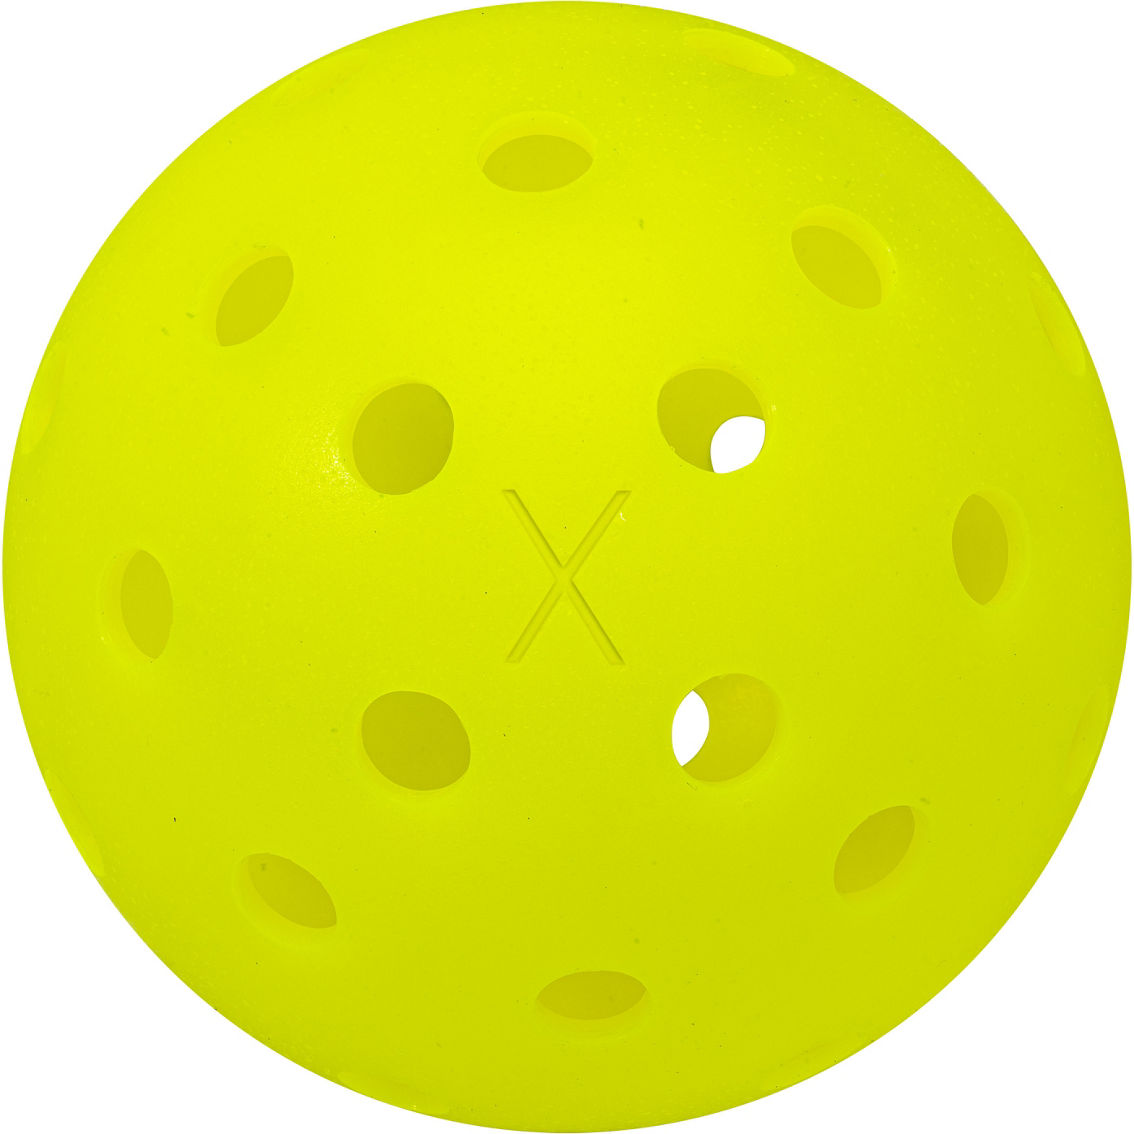 Franklin X-40 Outdoor Performance Pickleball - Image 2 of 3